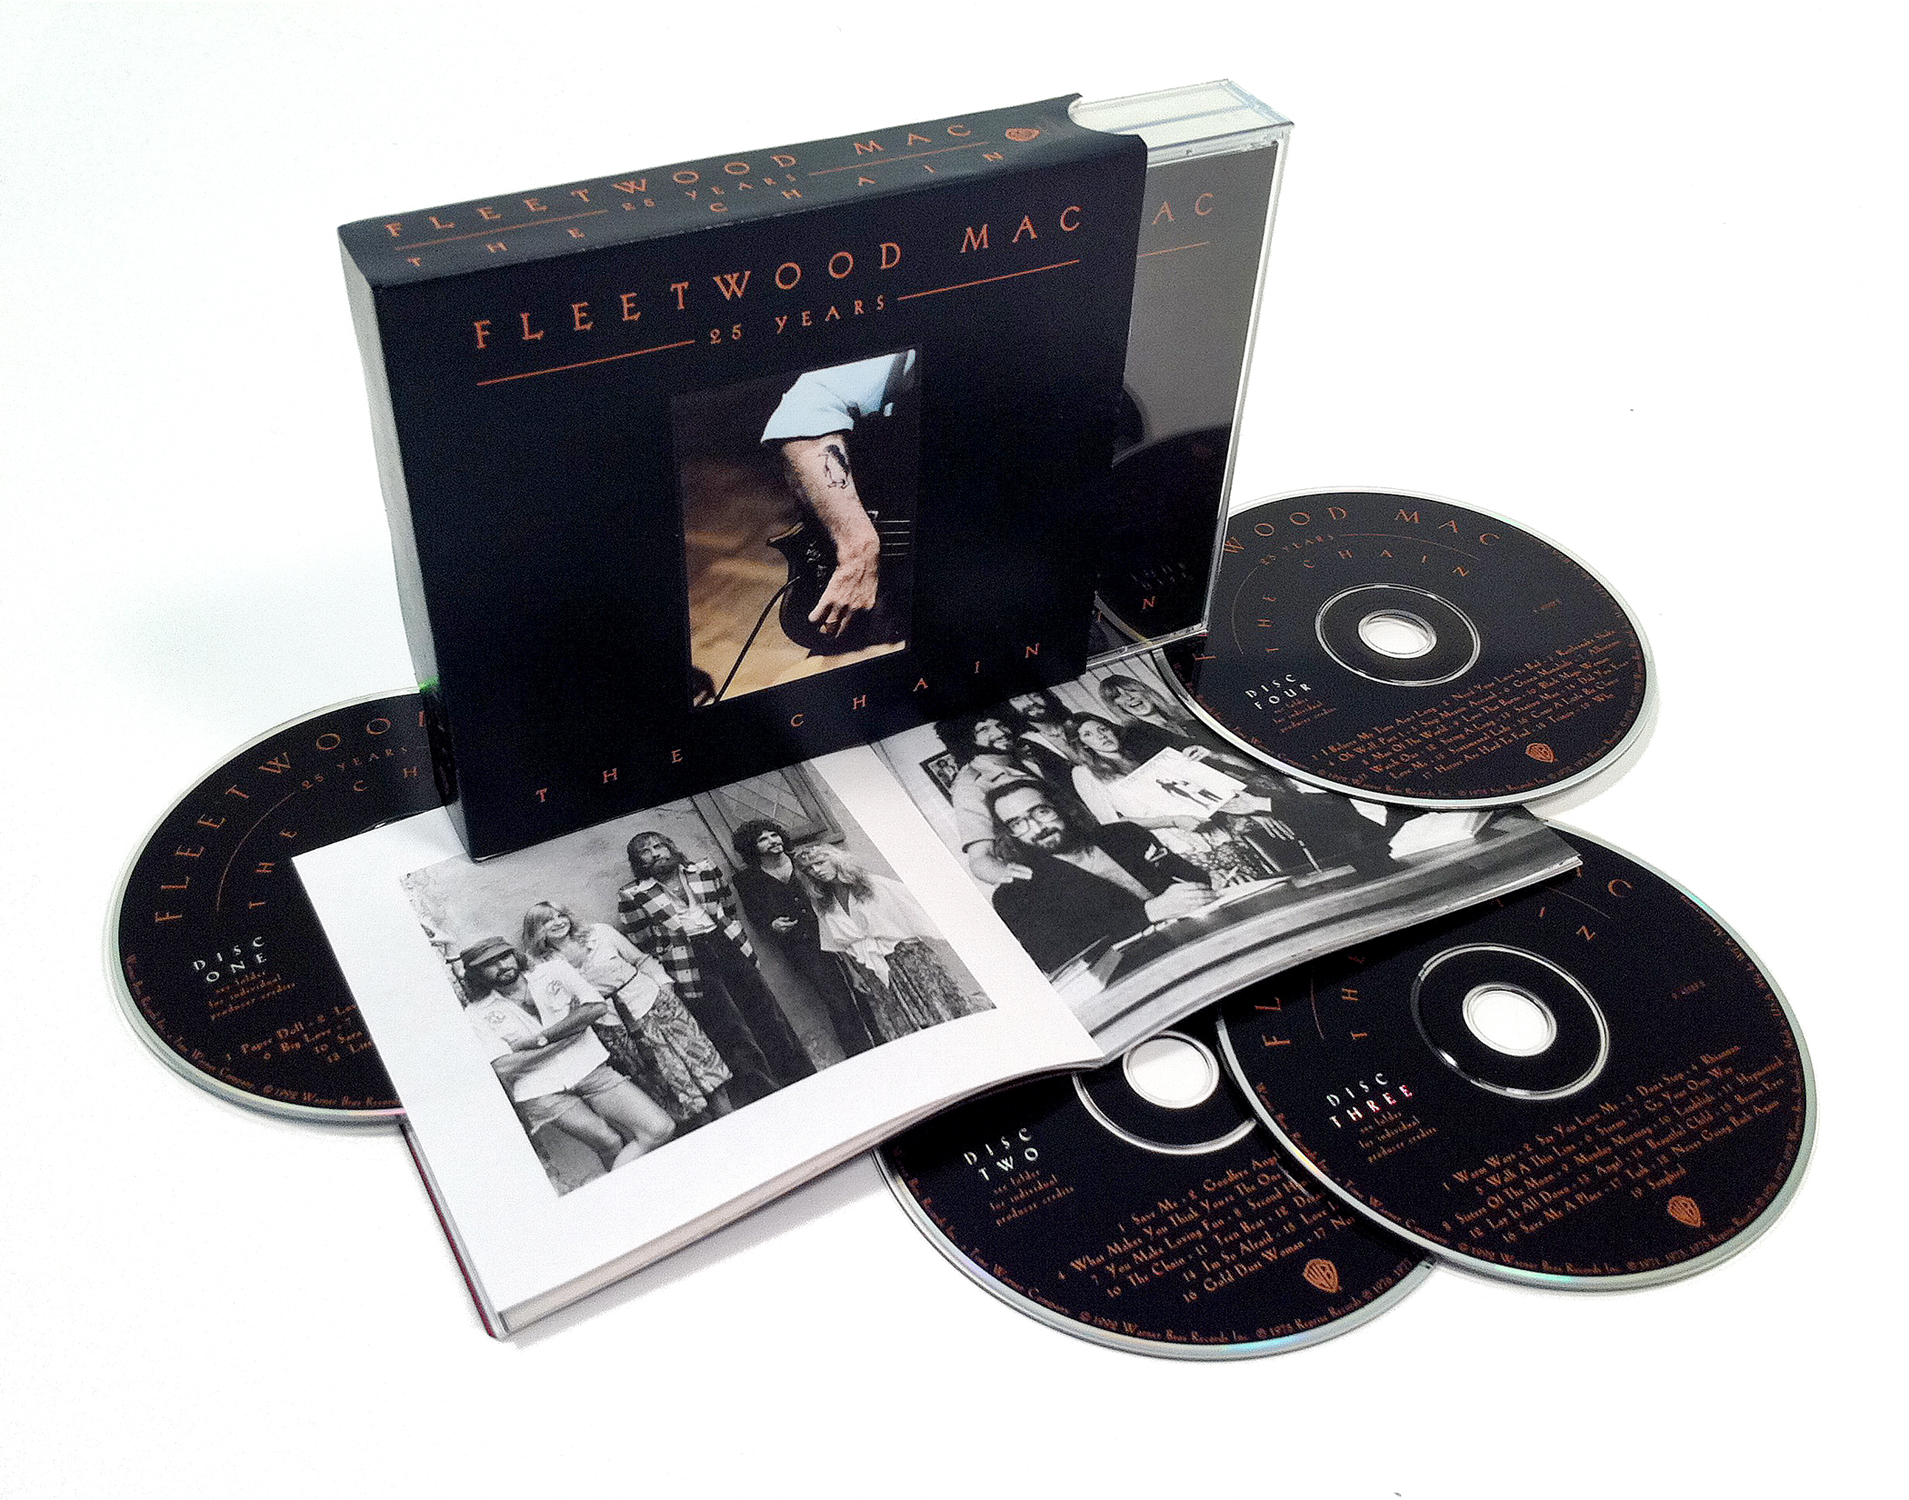 Fleetwood Mac / 25 Years - The Chain 4CD re-release